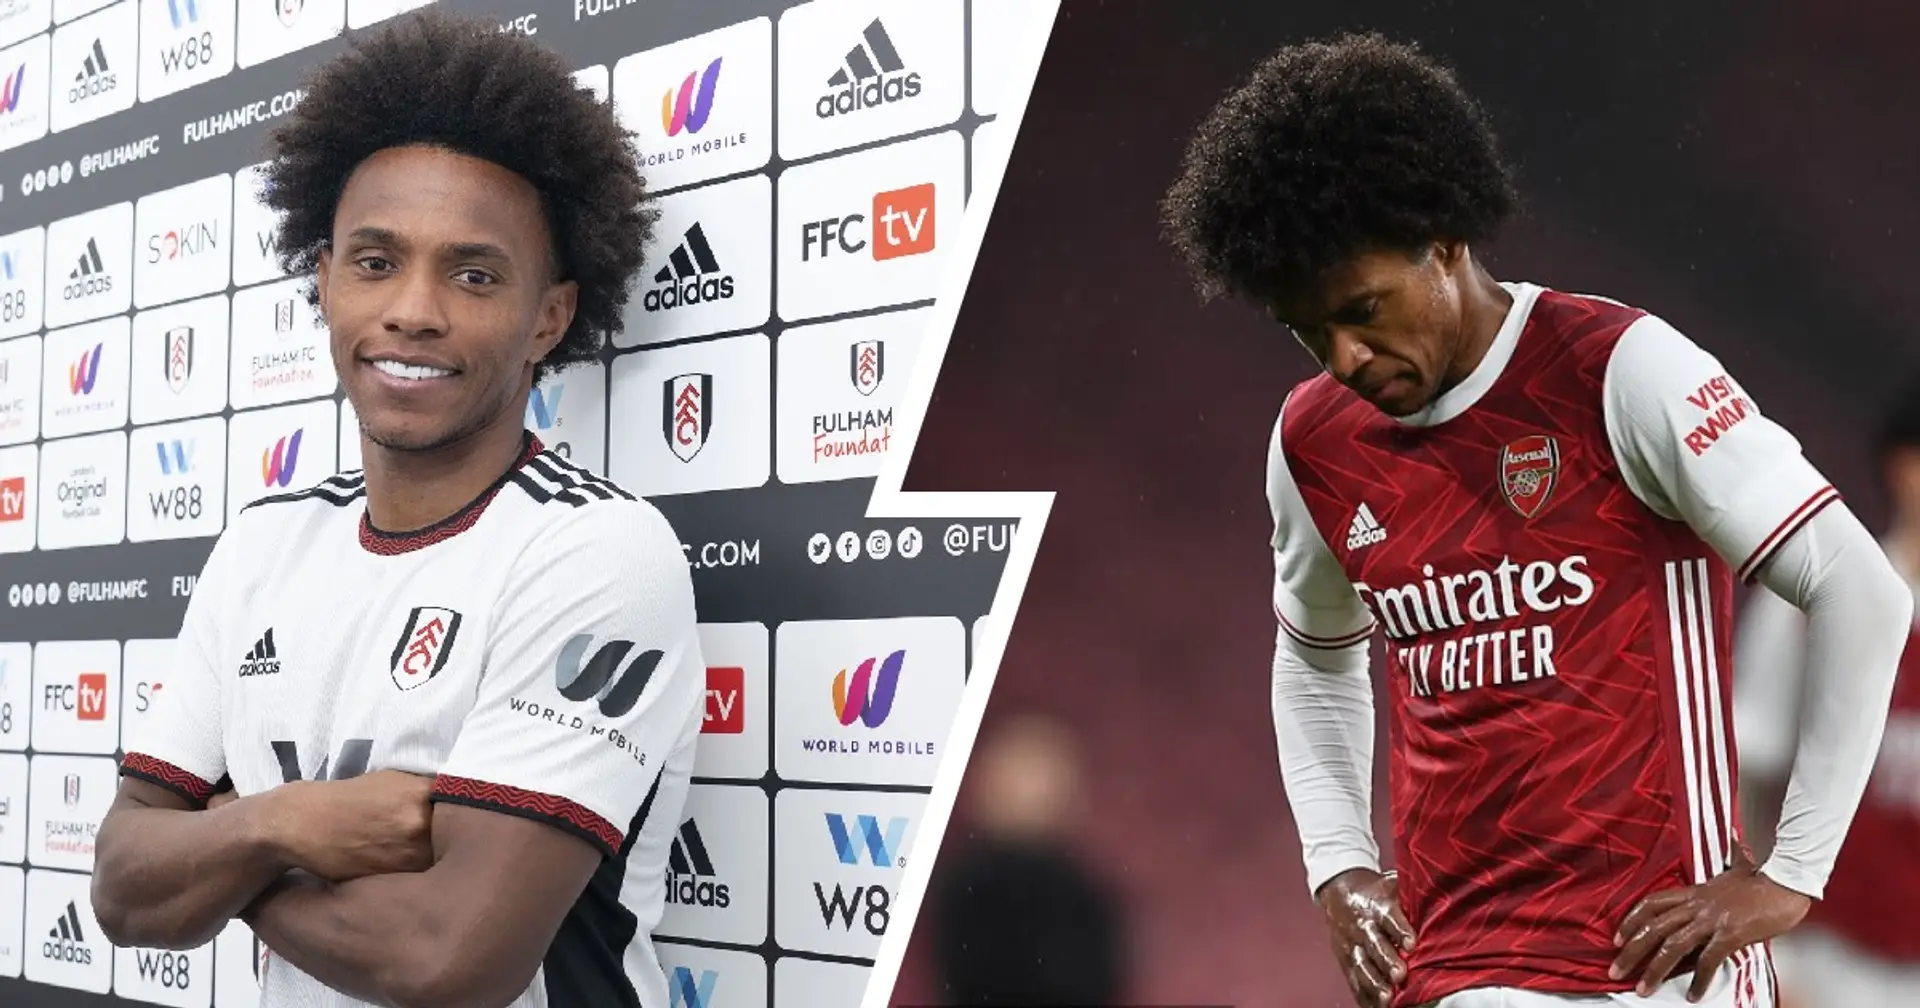 'I'm happy now at Fulham': Willian expresses regret over Chelsea departure